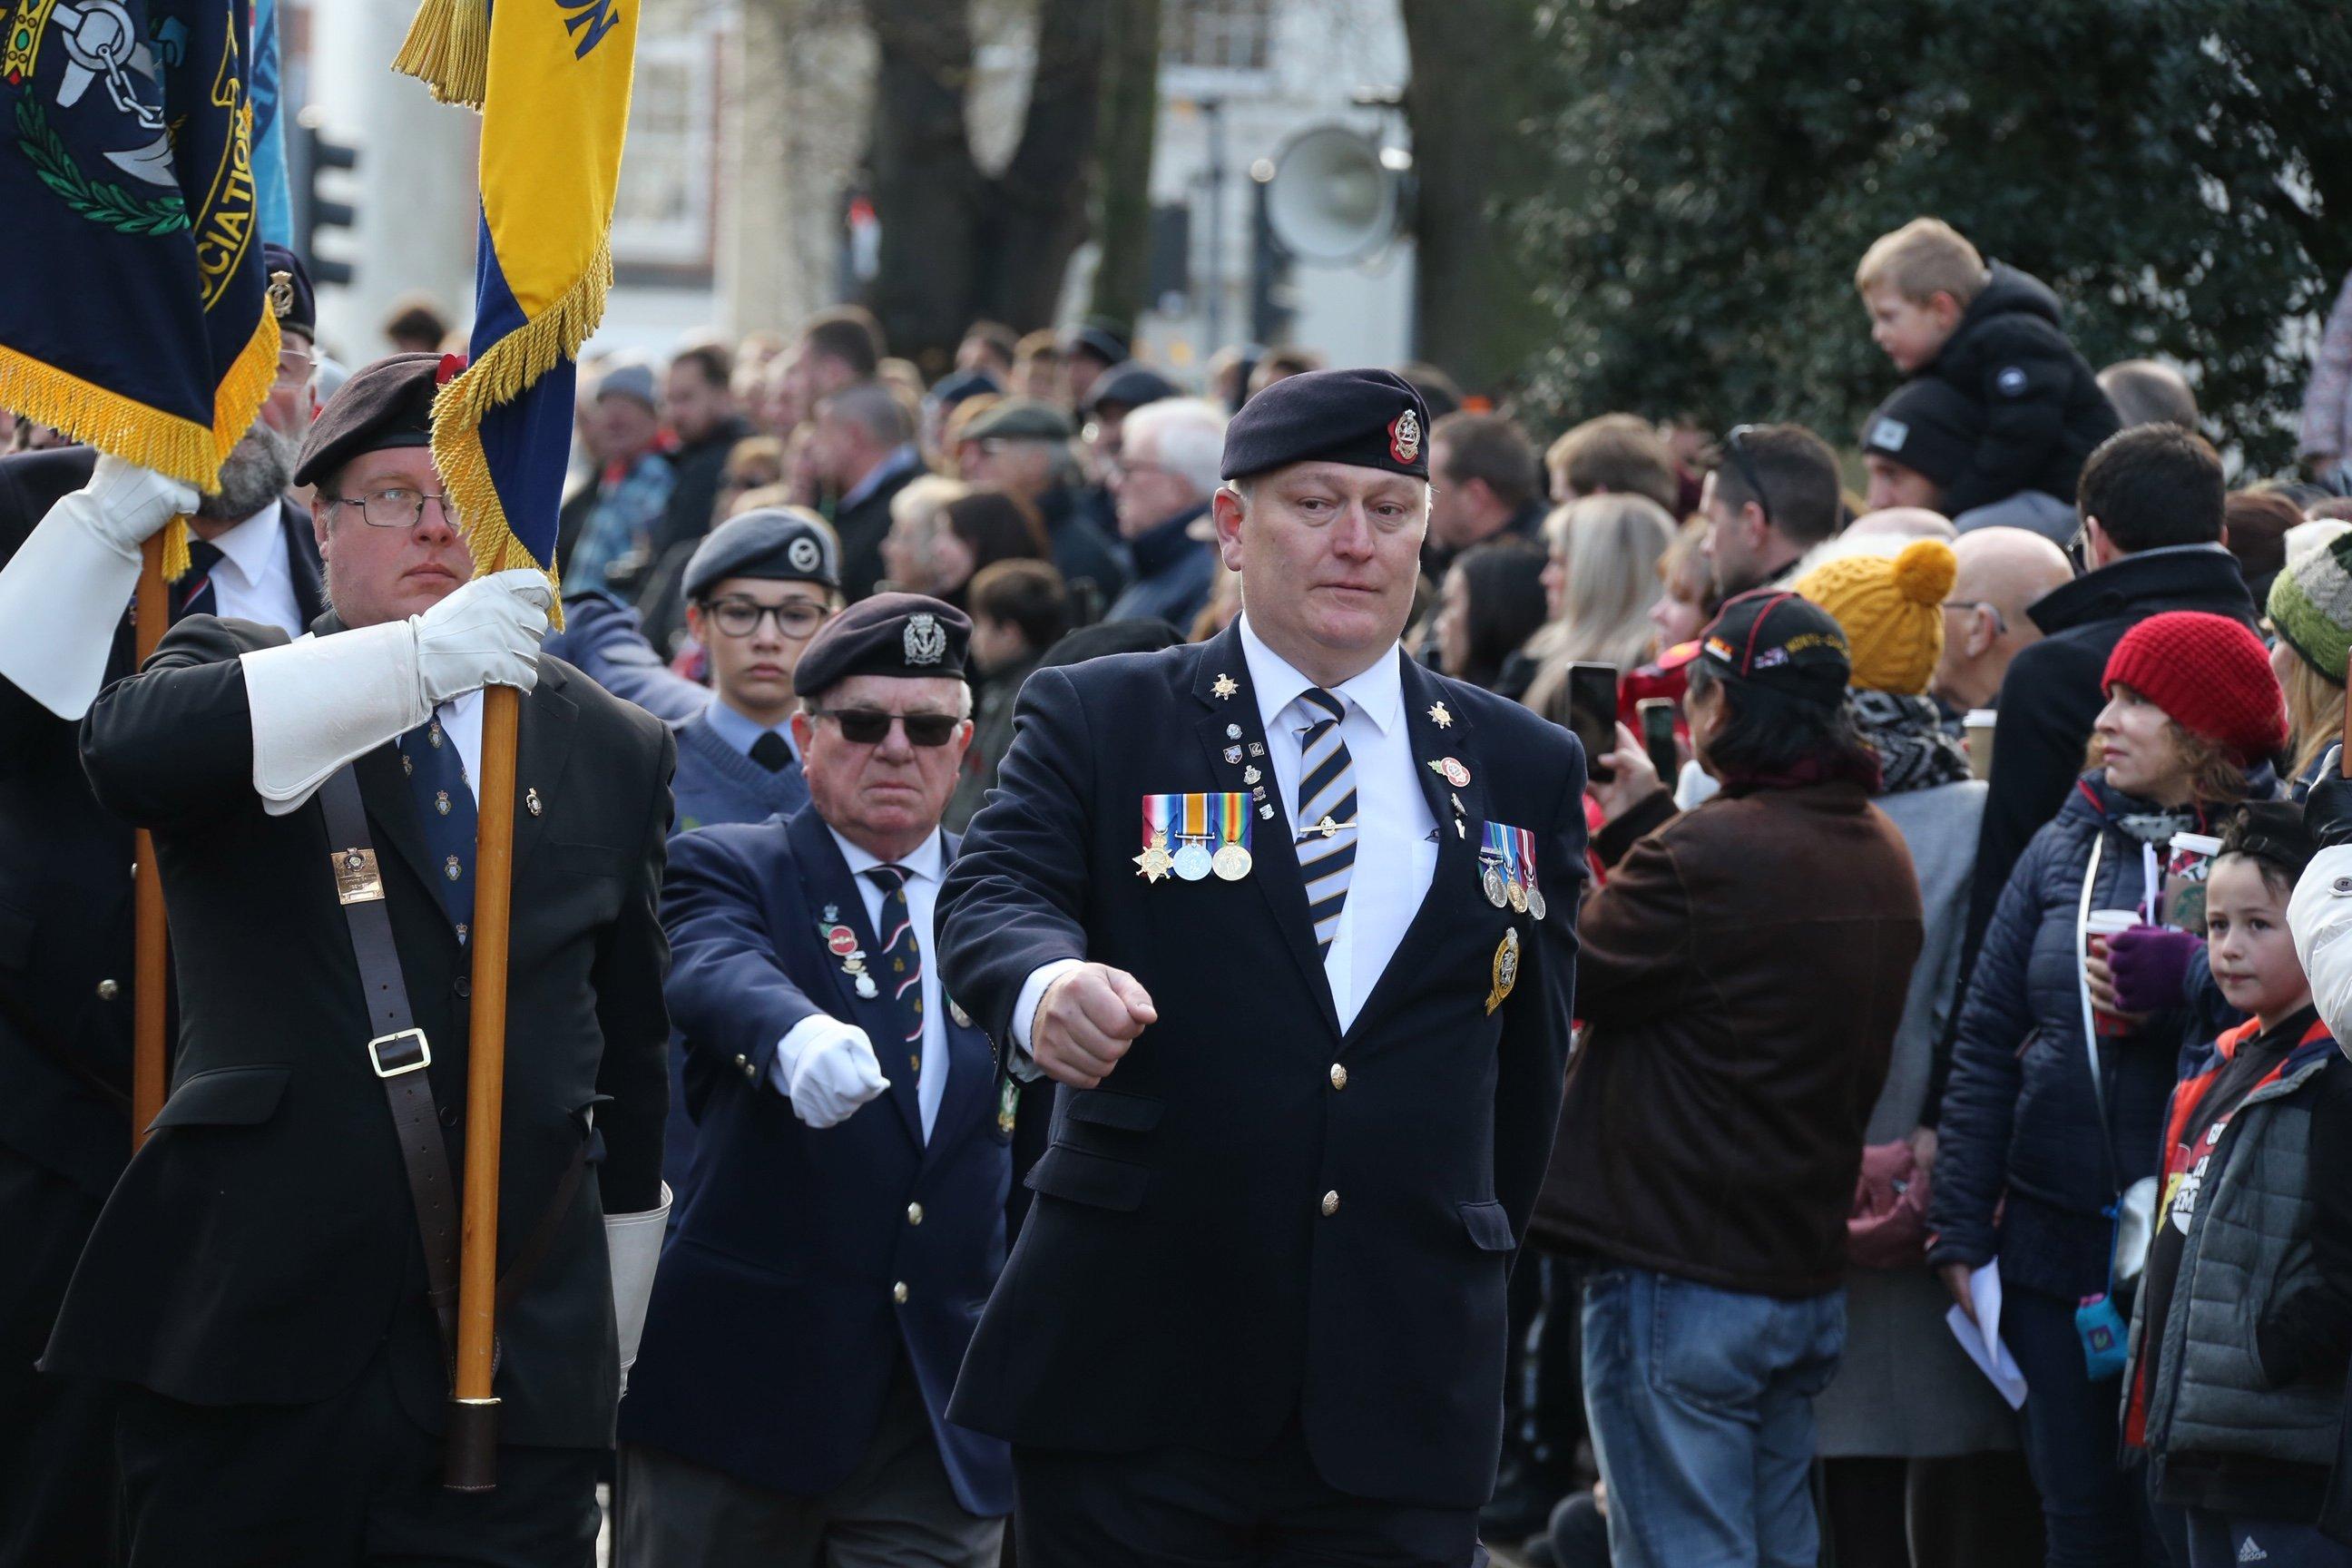 Remembrance Sunday in Worthing